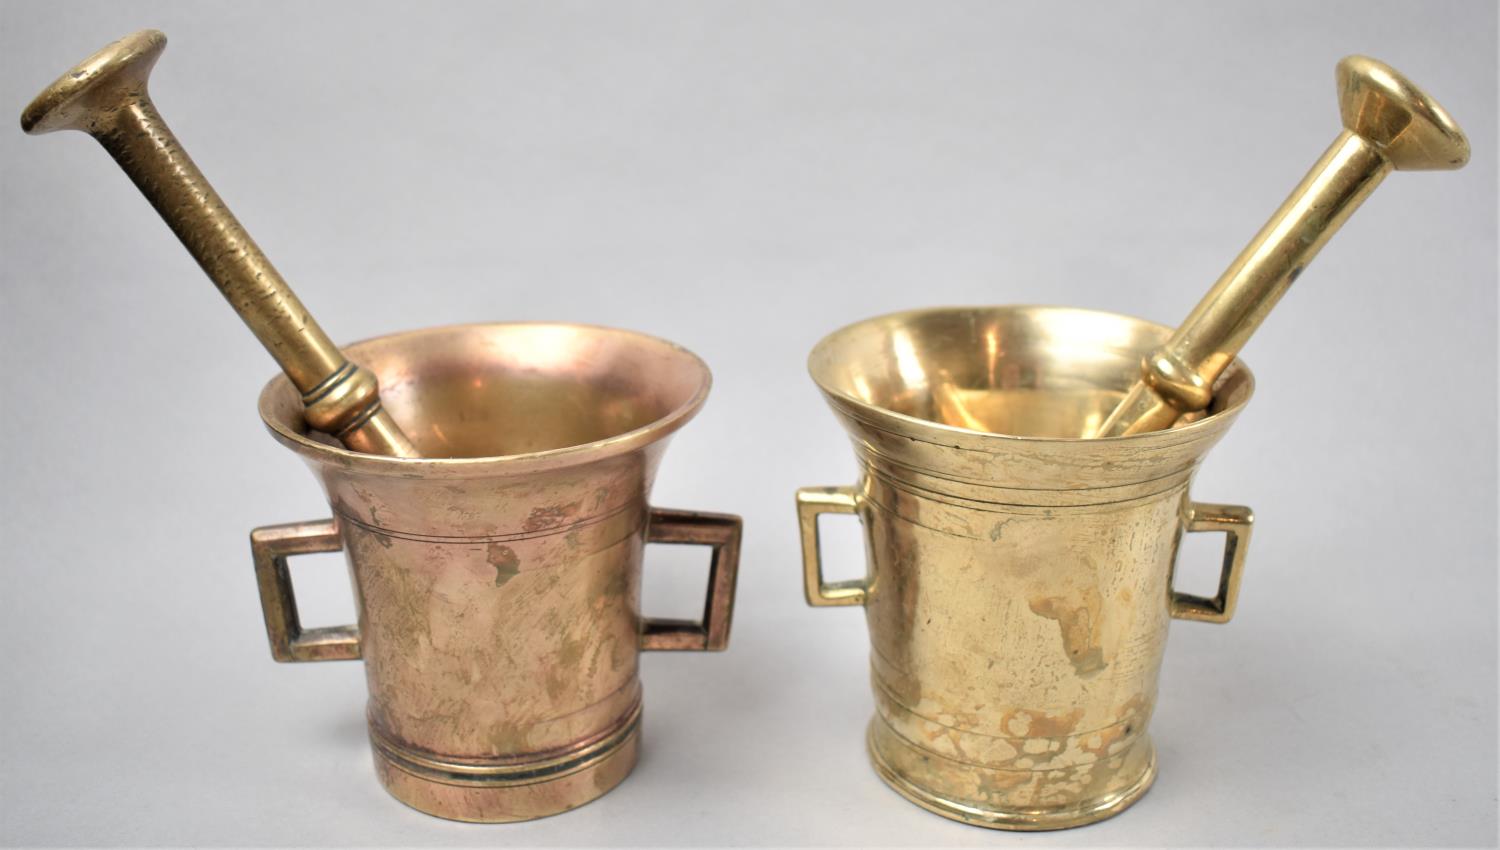 A Near Pair of Bronze and Brass Two Handled Mortars with Pestles, Each 10.5cm Diameter